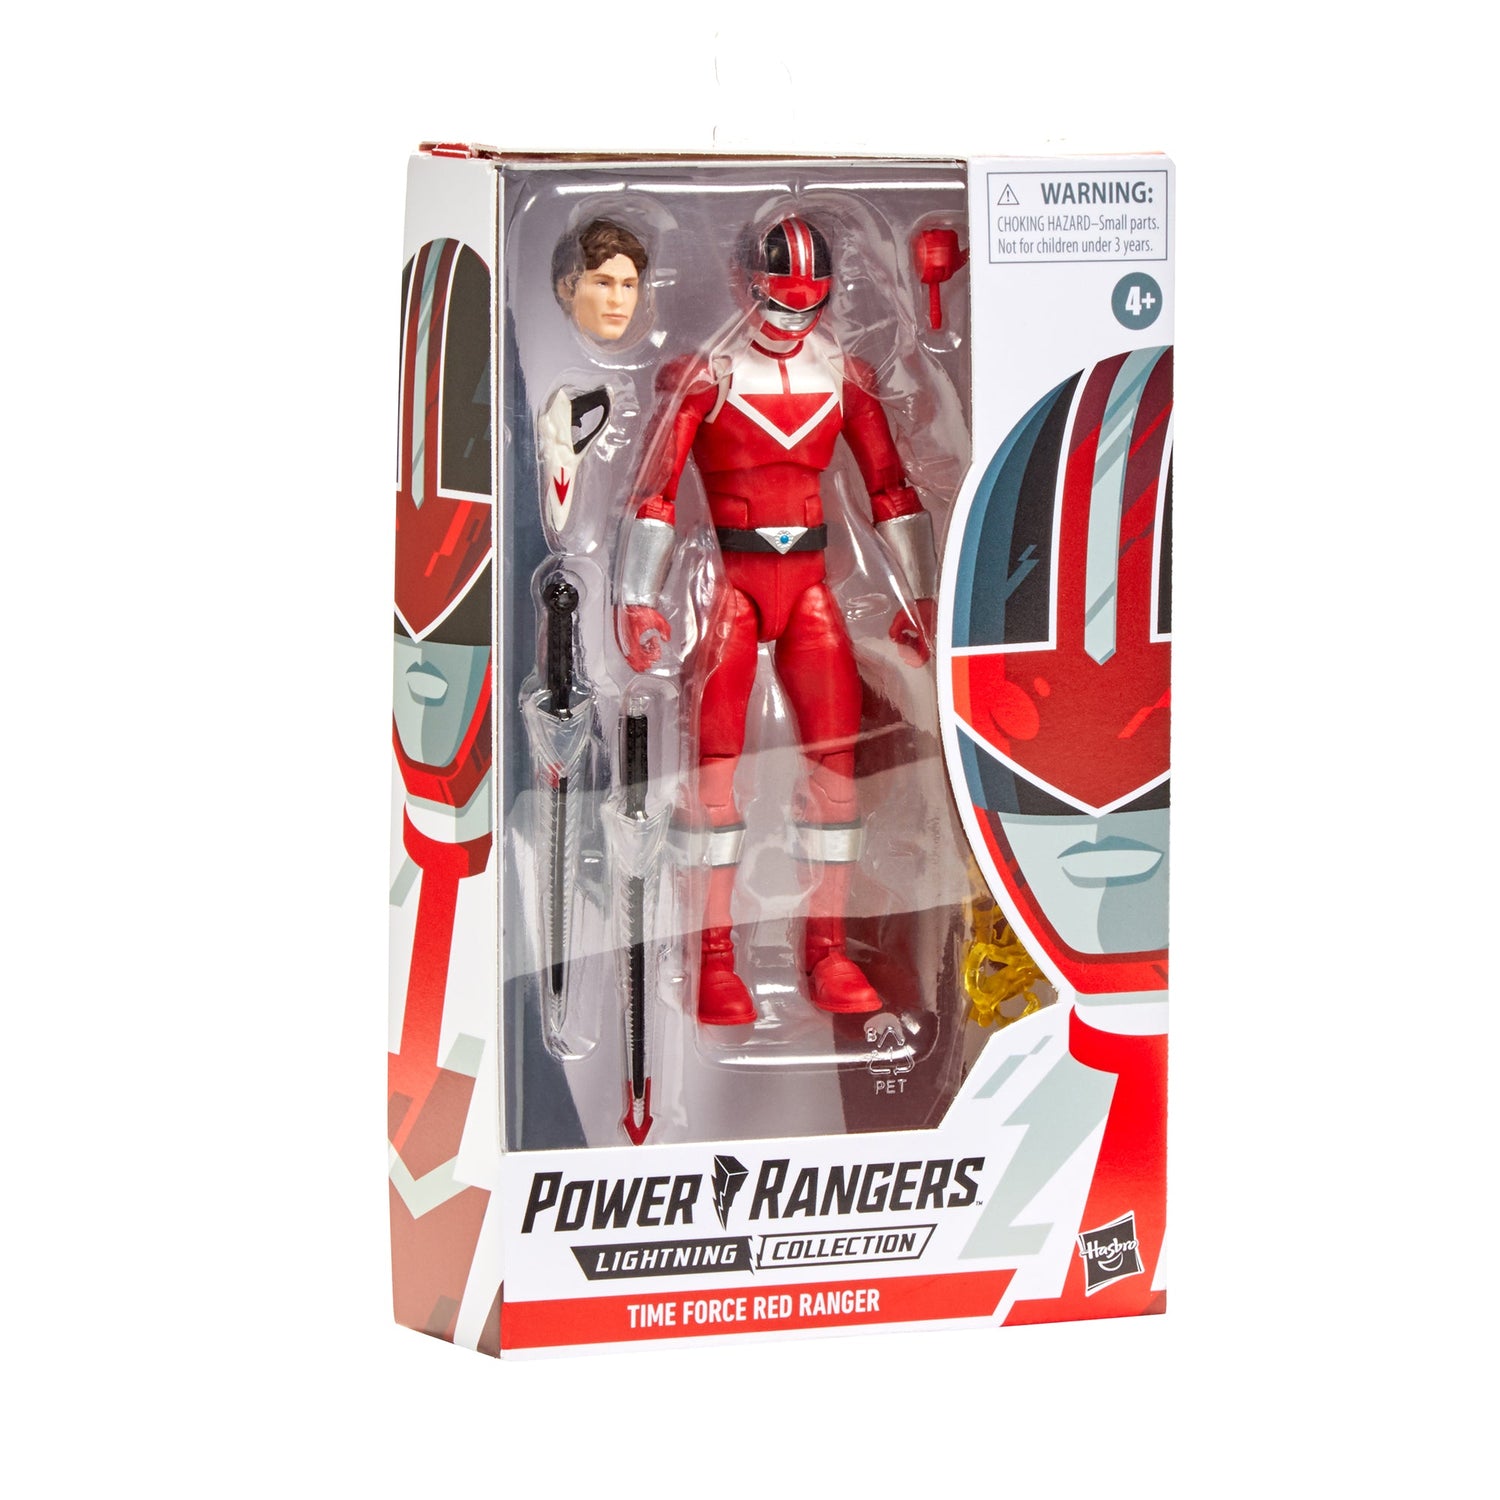 Power Rangers Lightning Collection Time Force Red Ranger Figure